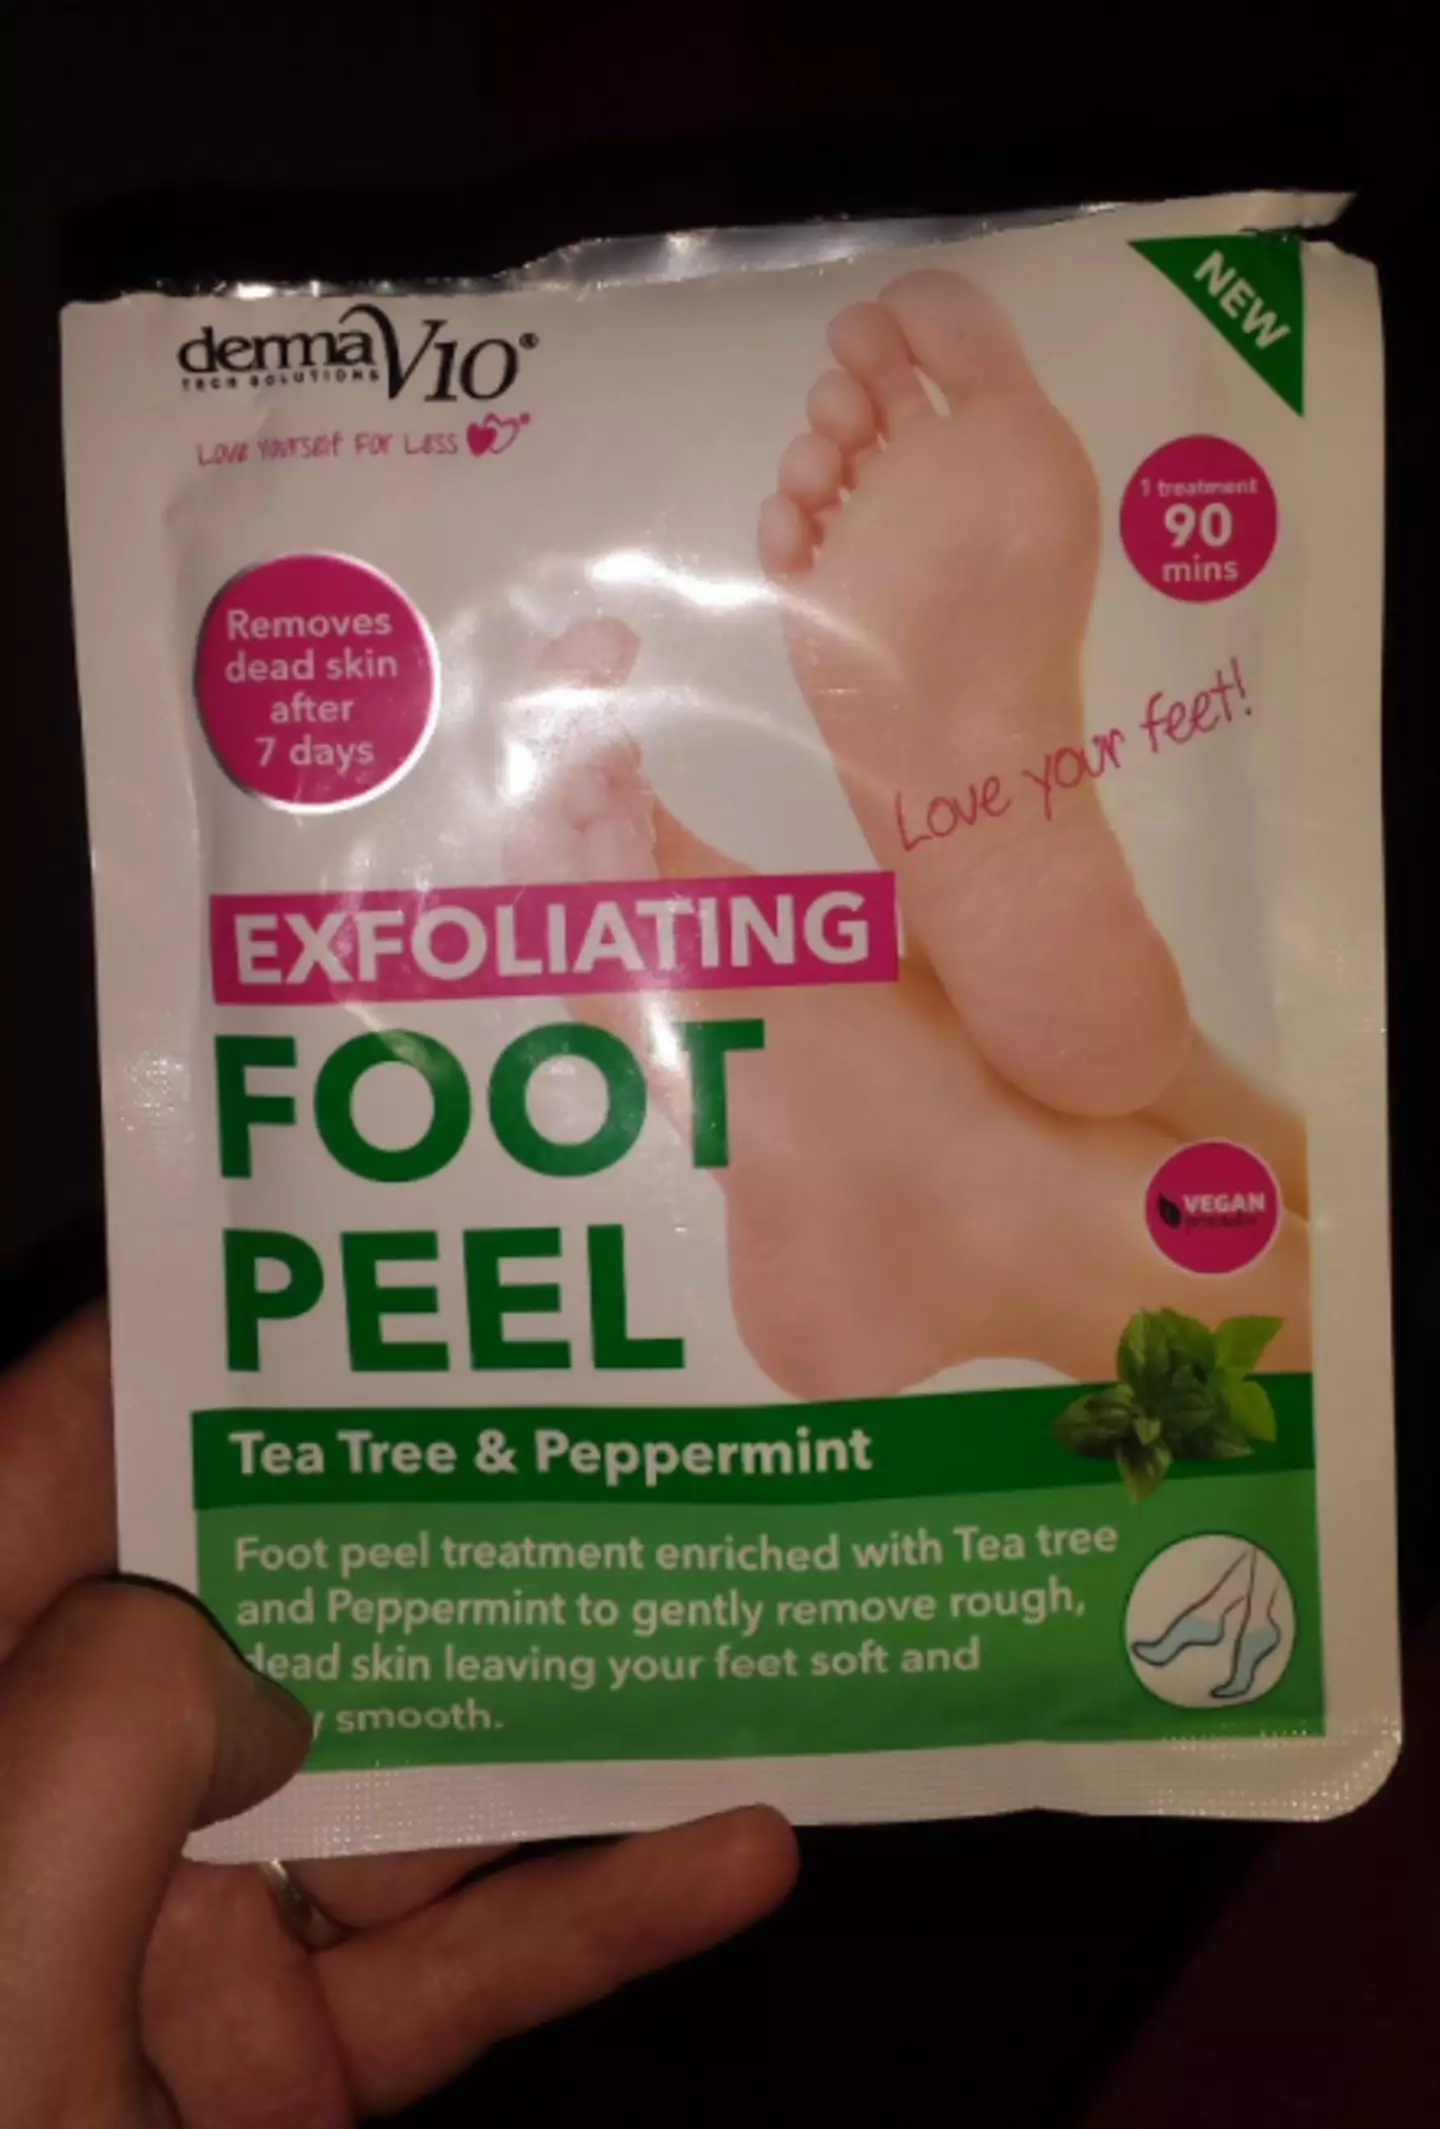 People have not been impressed with the foot peel (